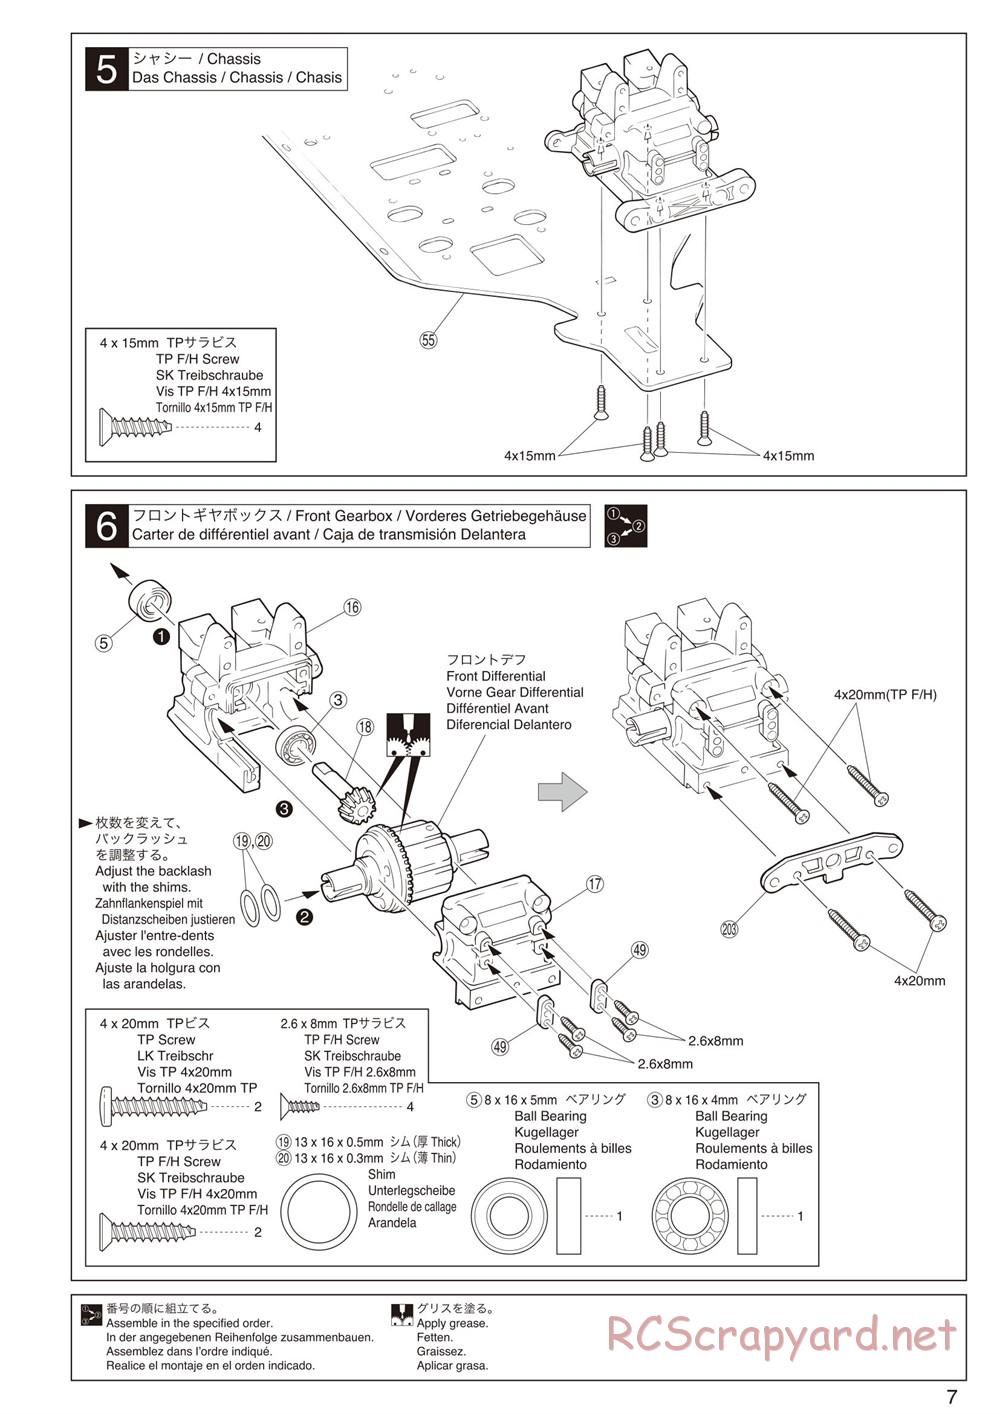 Kyosho - Inferno Neo 2.0 - Manual - Page 7